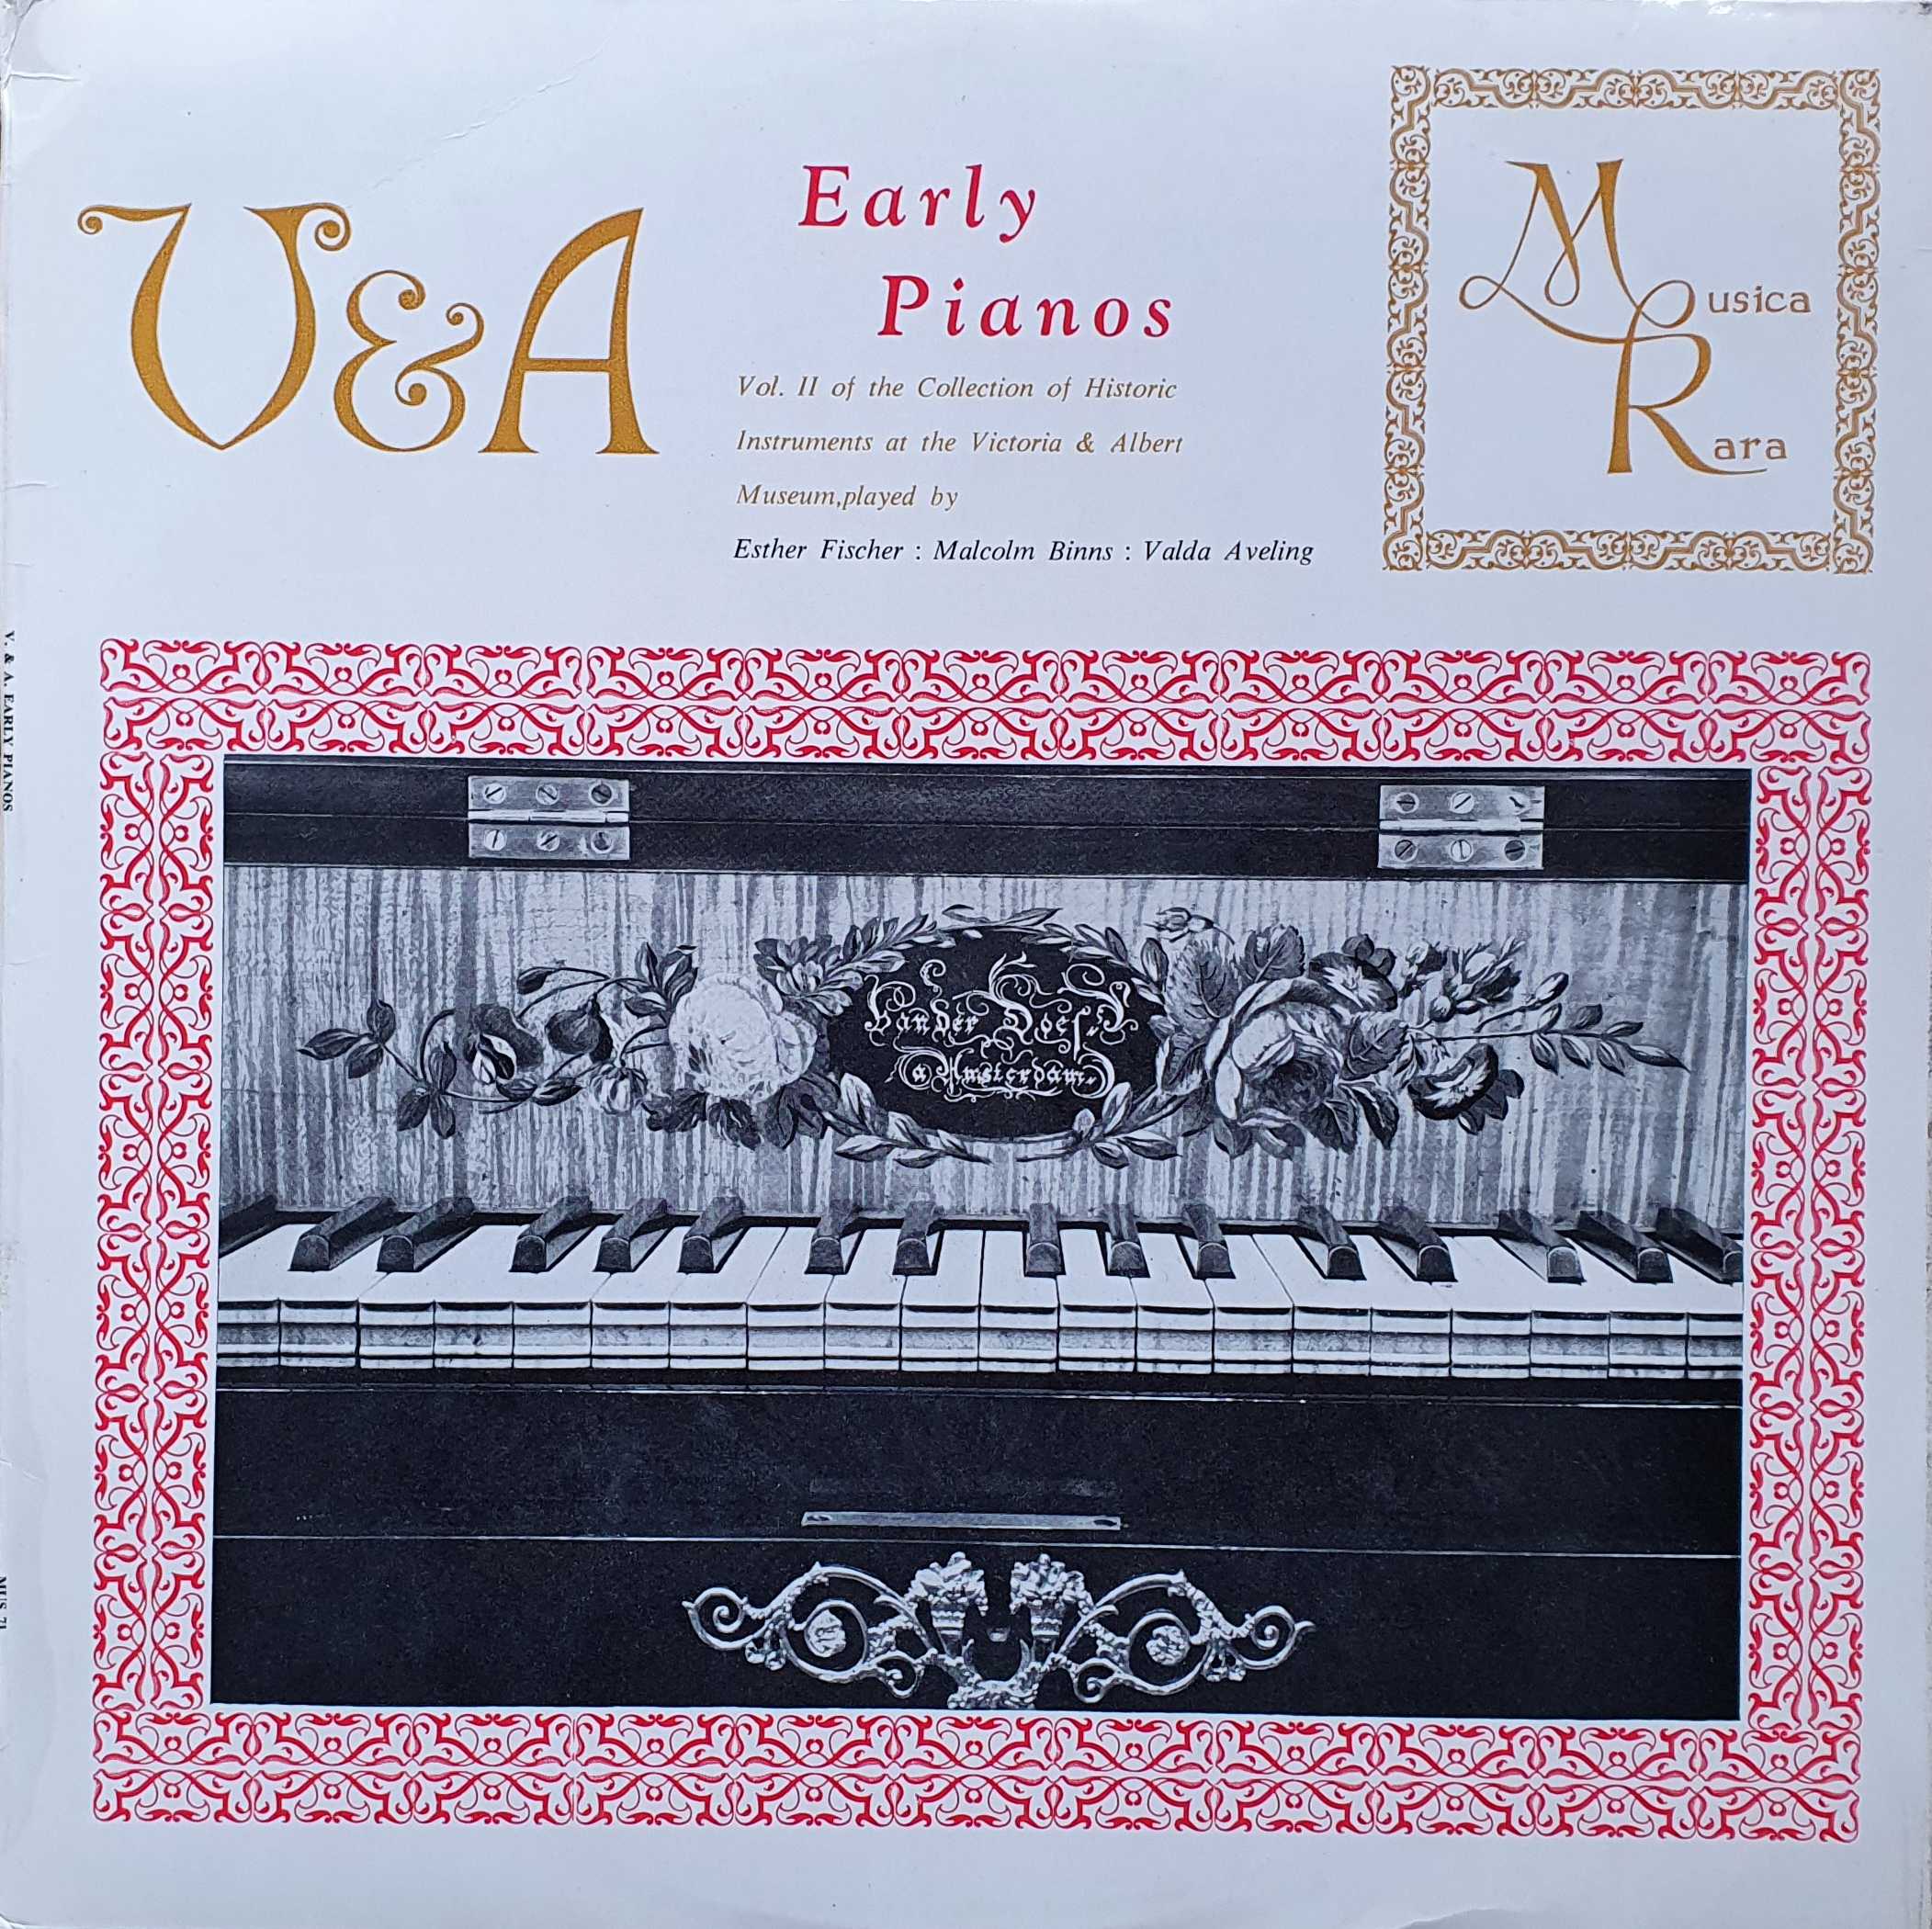 Picture of The V & A keyboard collection - Volume II by artist Various from the BBC albums - Records and Tapes library